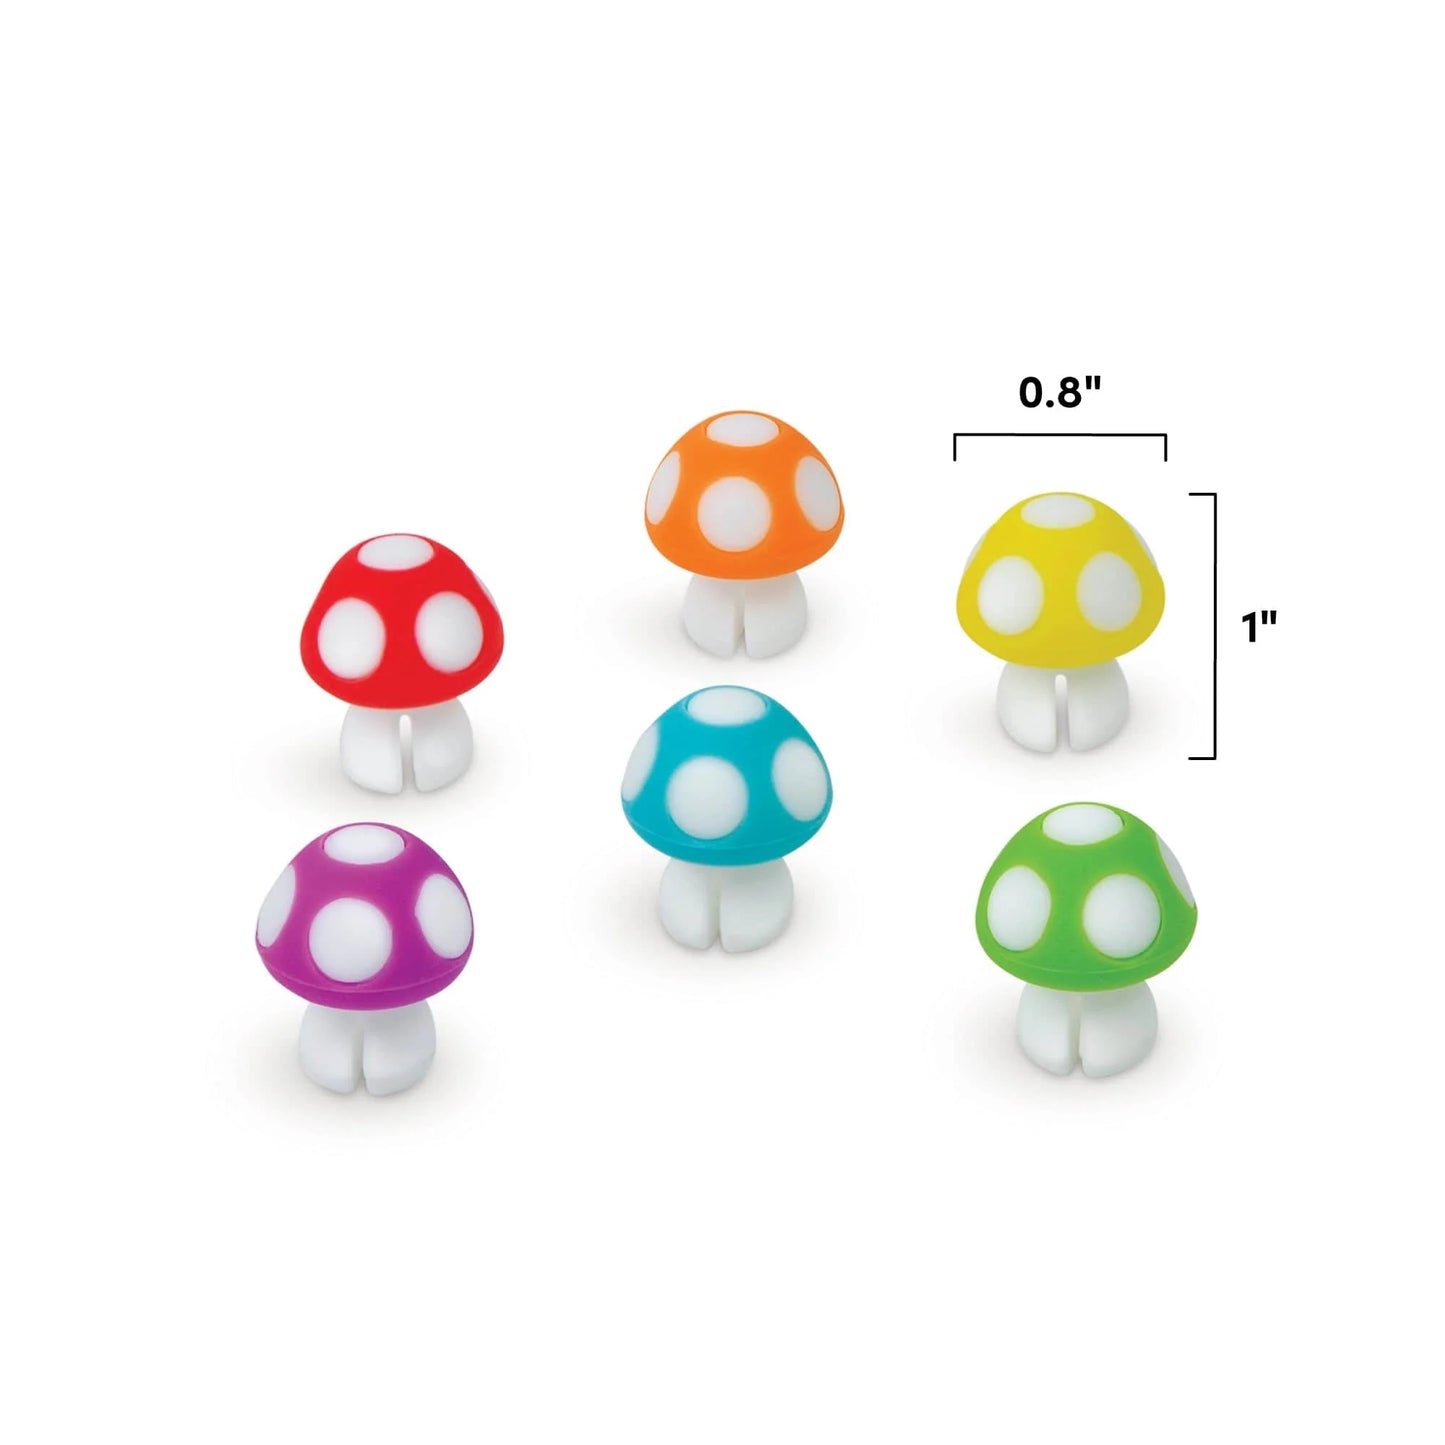 Fred & Friends Toadstool Drink Markers